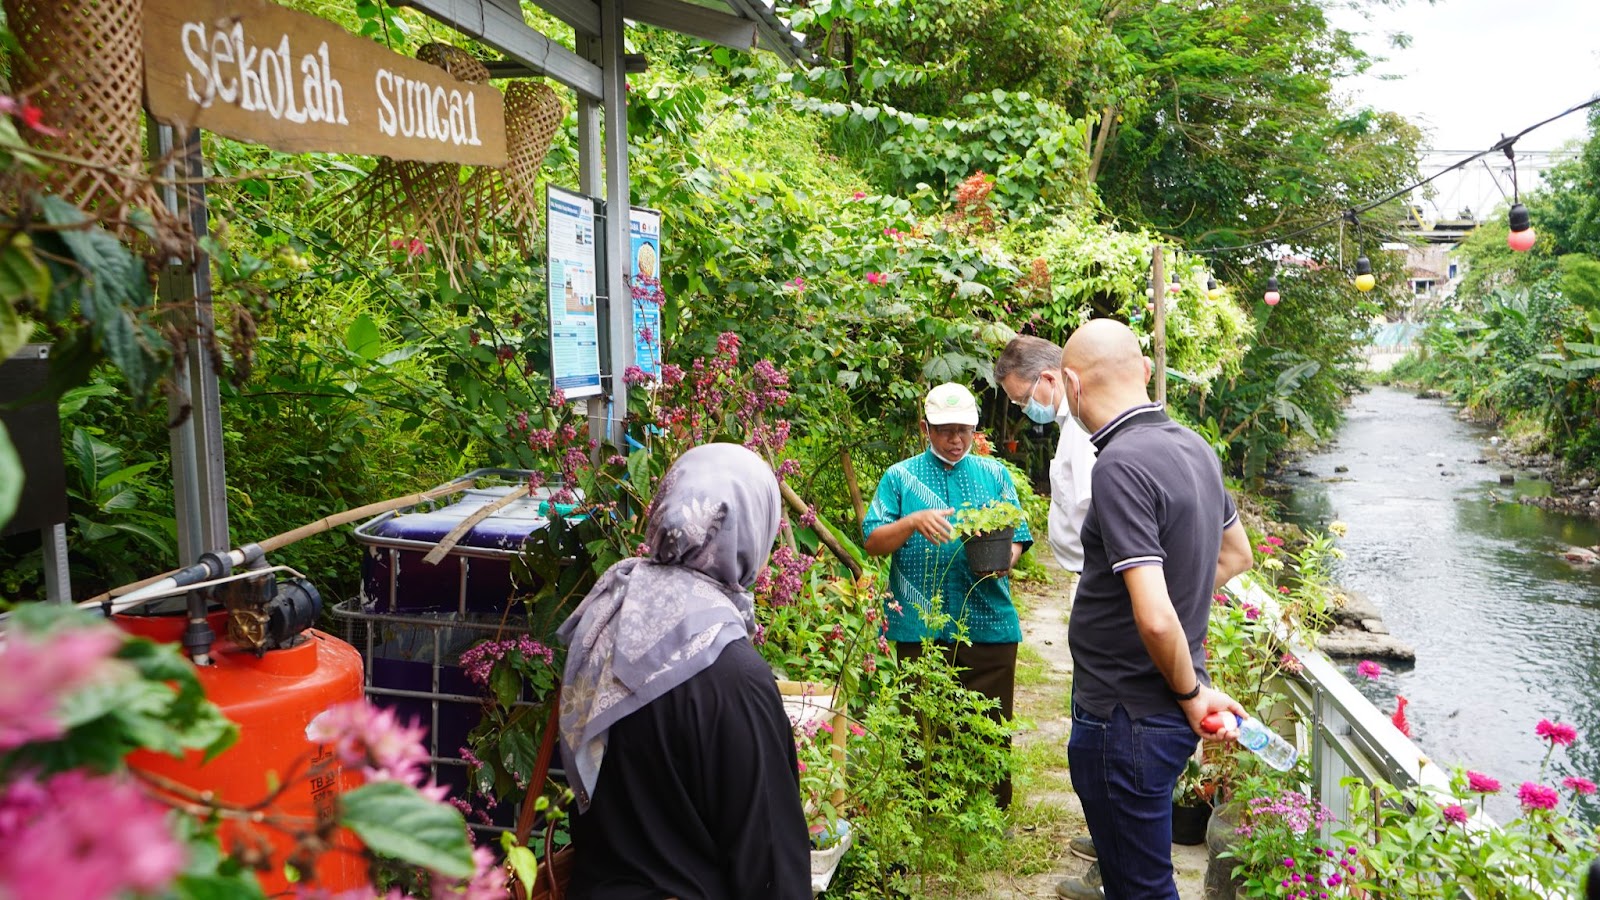 “Sekolah sungai” (river school) - the greywater purification system is a ‘school’ for the local community, a place that young and old can learn how academic research can be applied to problems in daily life.